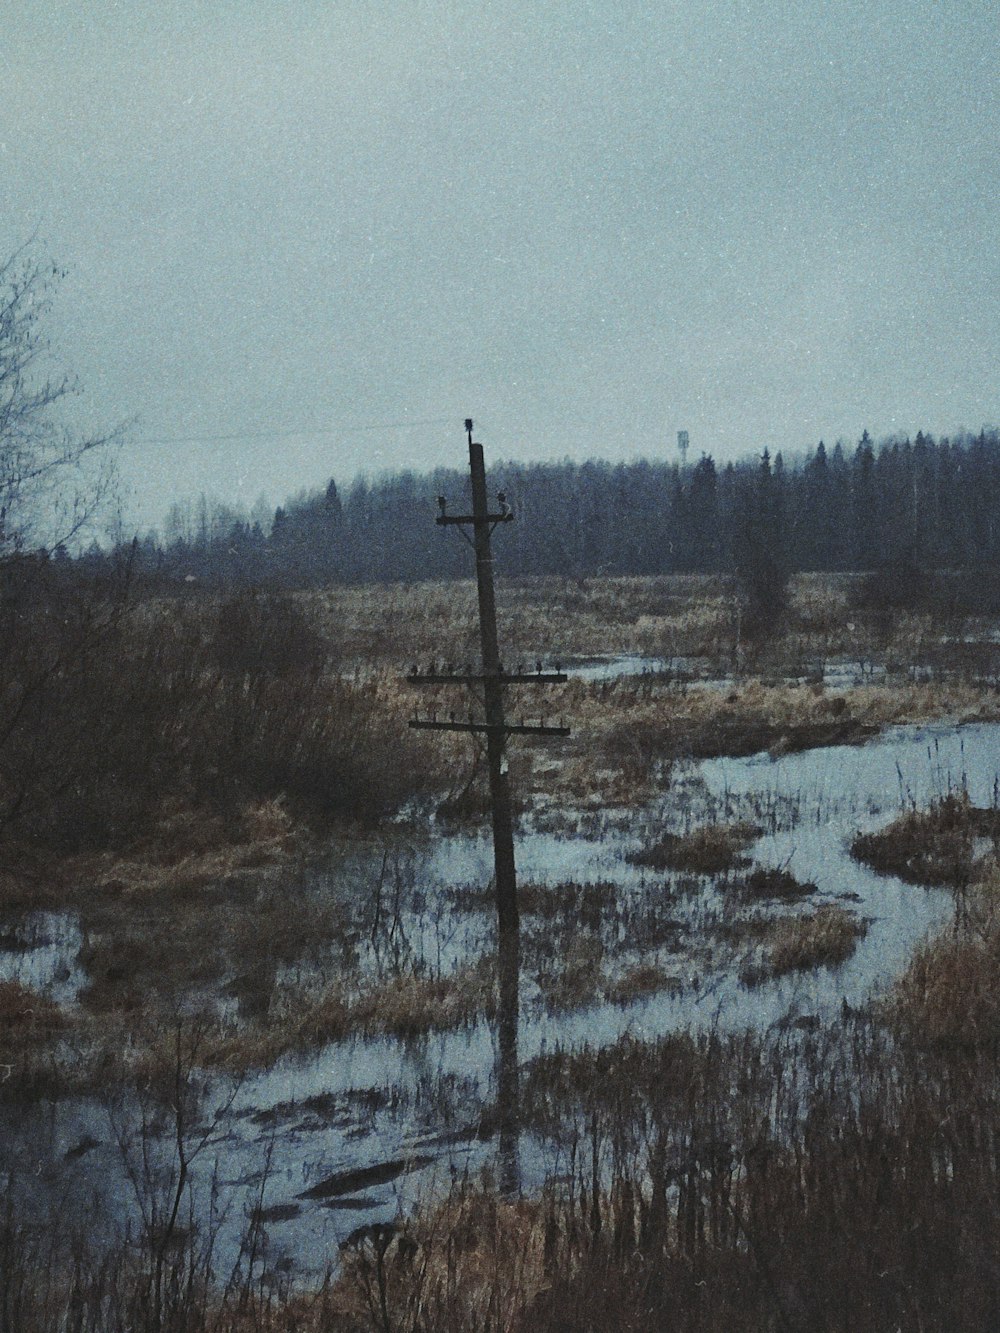 a flooded field with a telephone pole in the middle of it